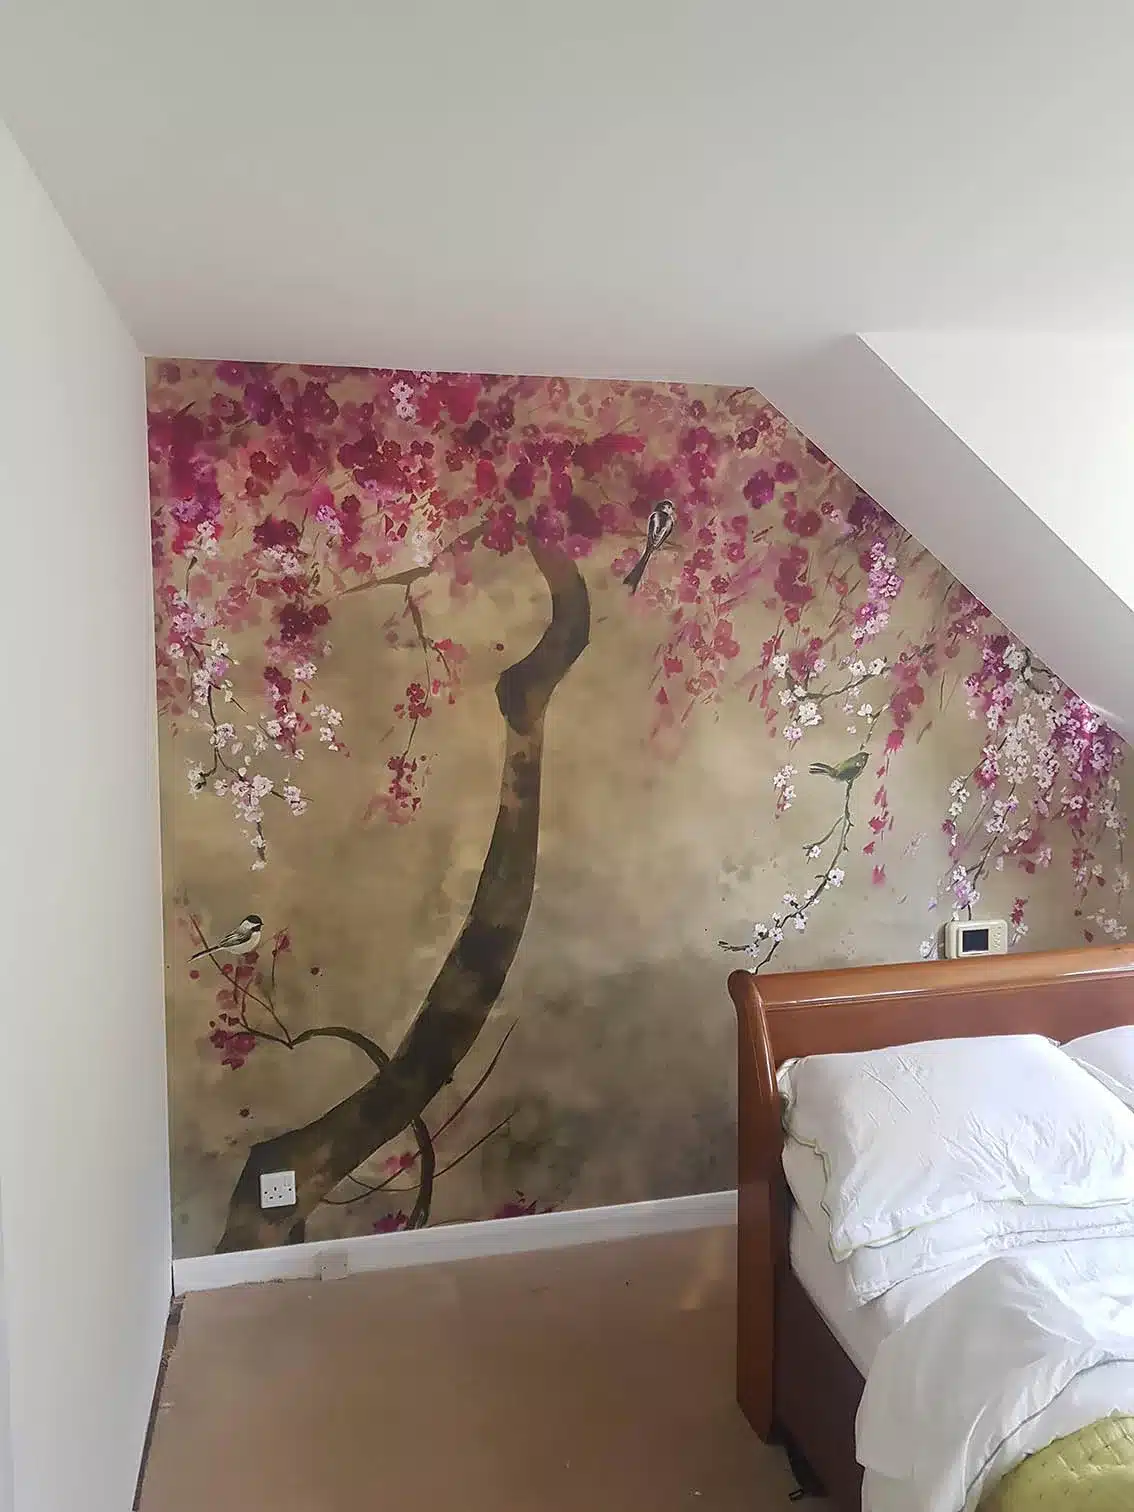 Wallpaper mural professional wallpaper hanging. A tree with pink flowers and birds in a bedroom.